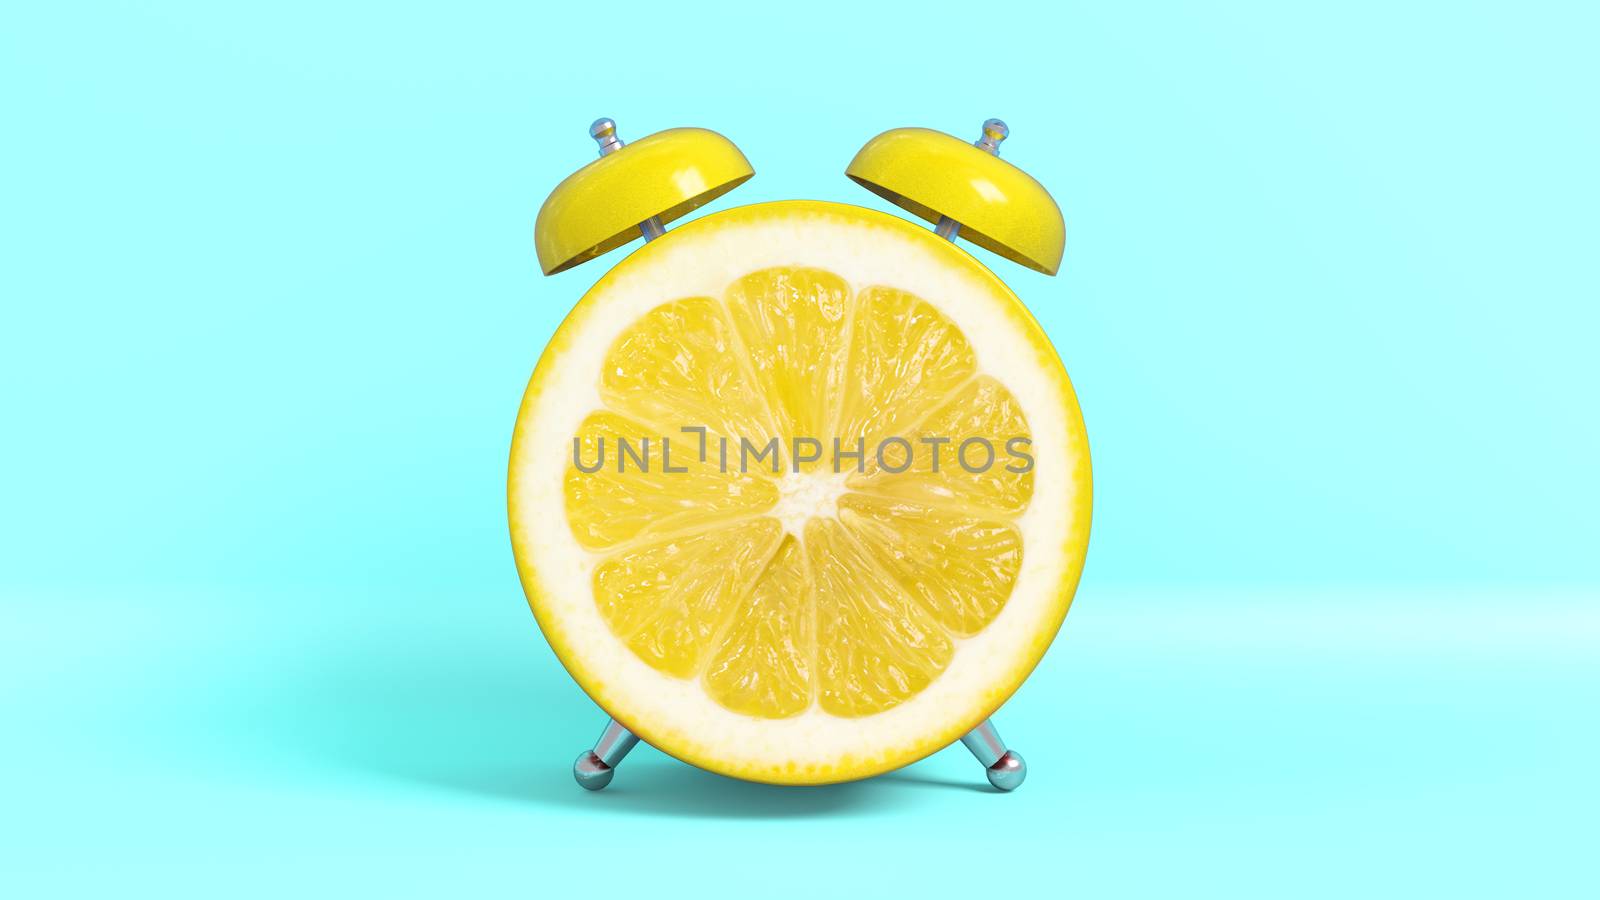 Wake up vintage morning shaped lemon. Concept illustrating that it is time to take vitamins. 3D rendering.